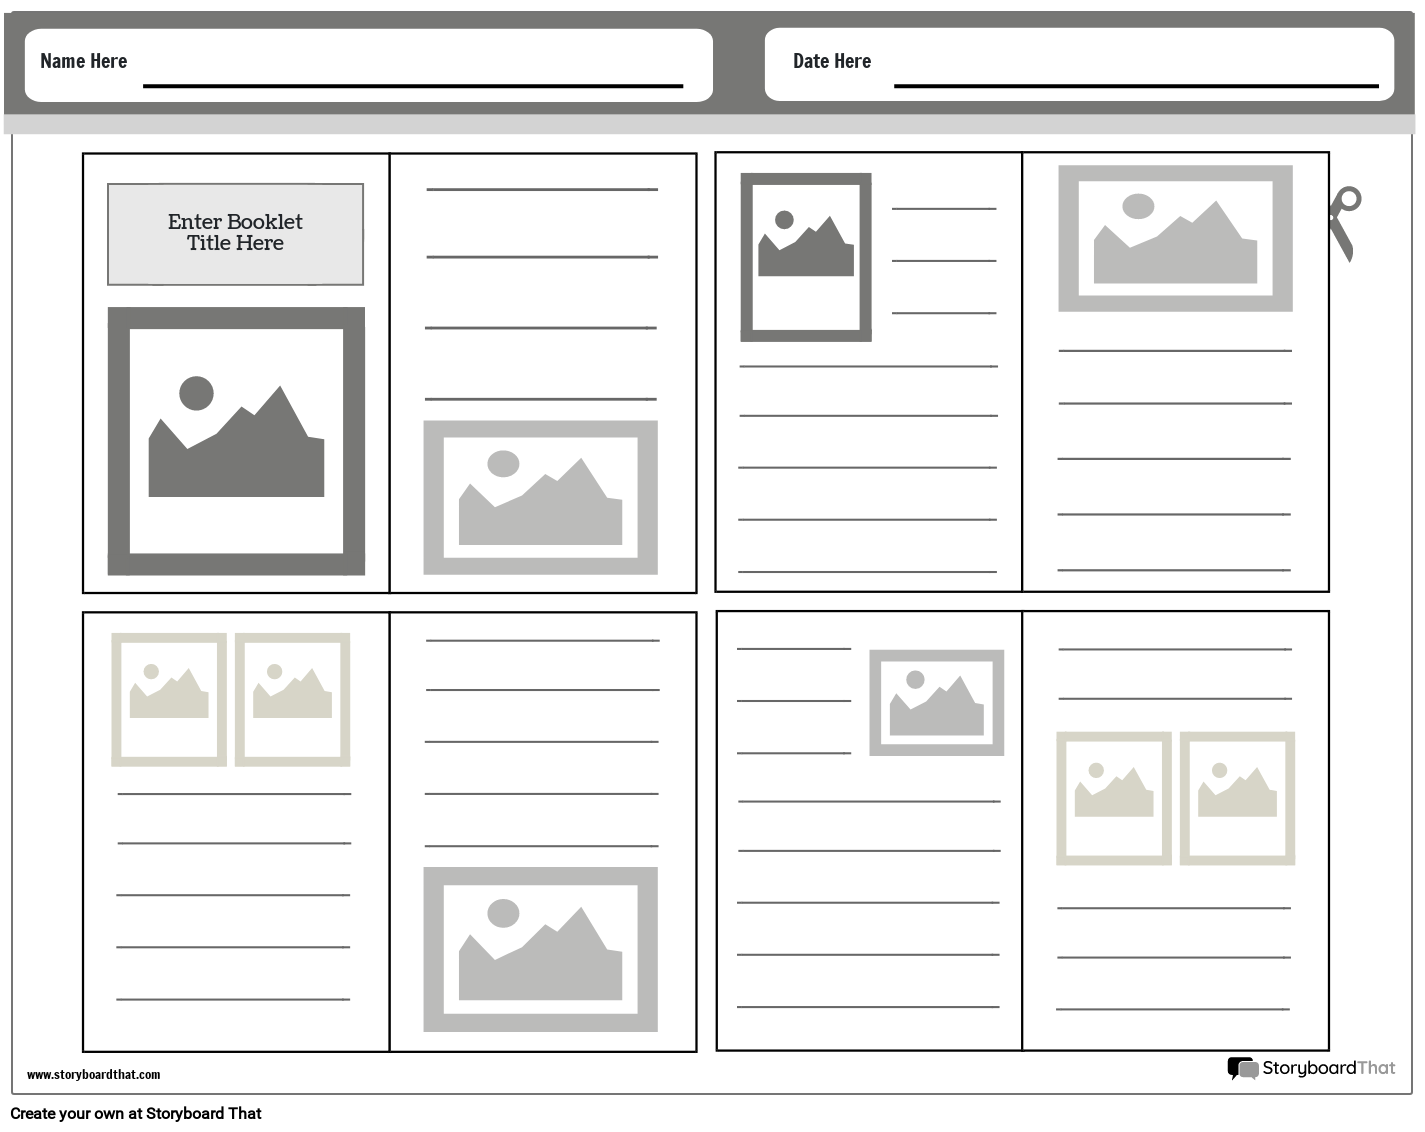 Landscape Based Simple Booklet Template with Lines